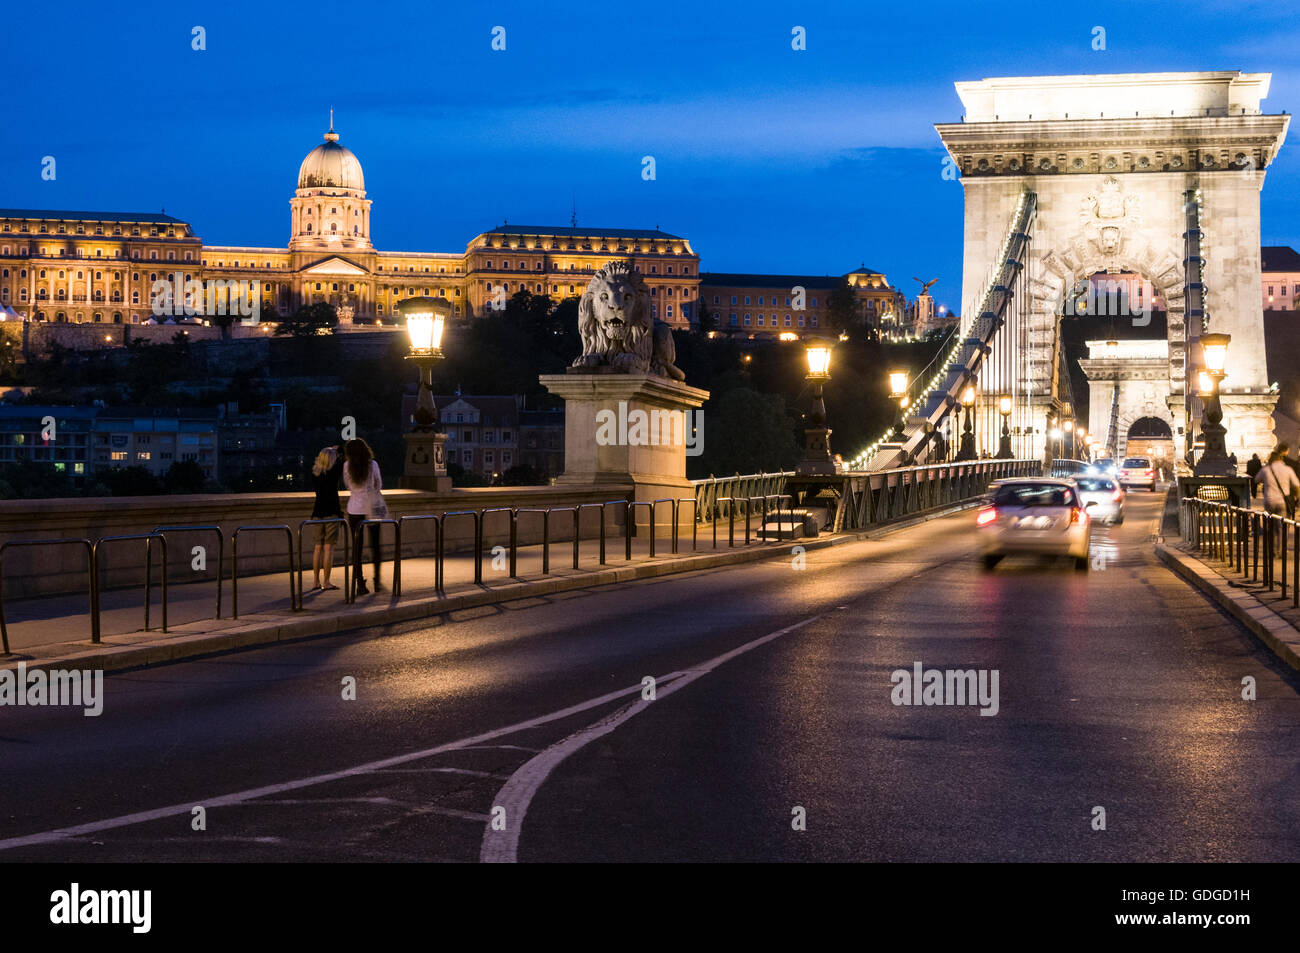 The former Royal Palace and the oldest bridge, Széchenyi Chain Bridge in Budapest in Hungary.  The Chain Bridge was designed by Stock Photo